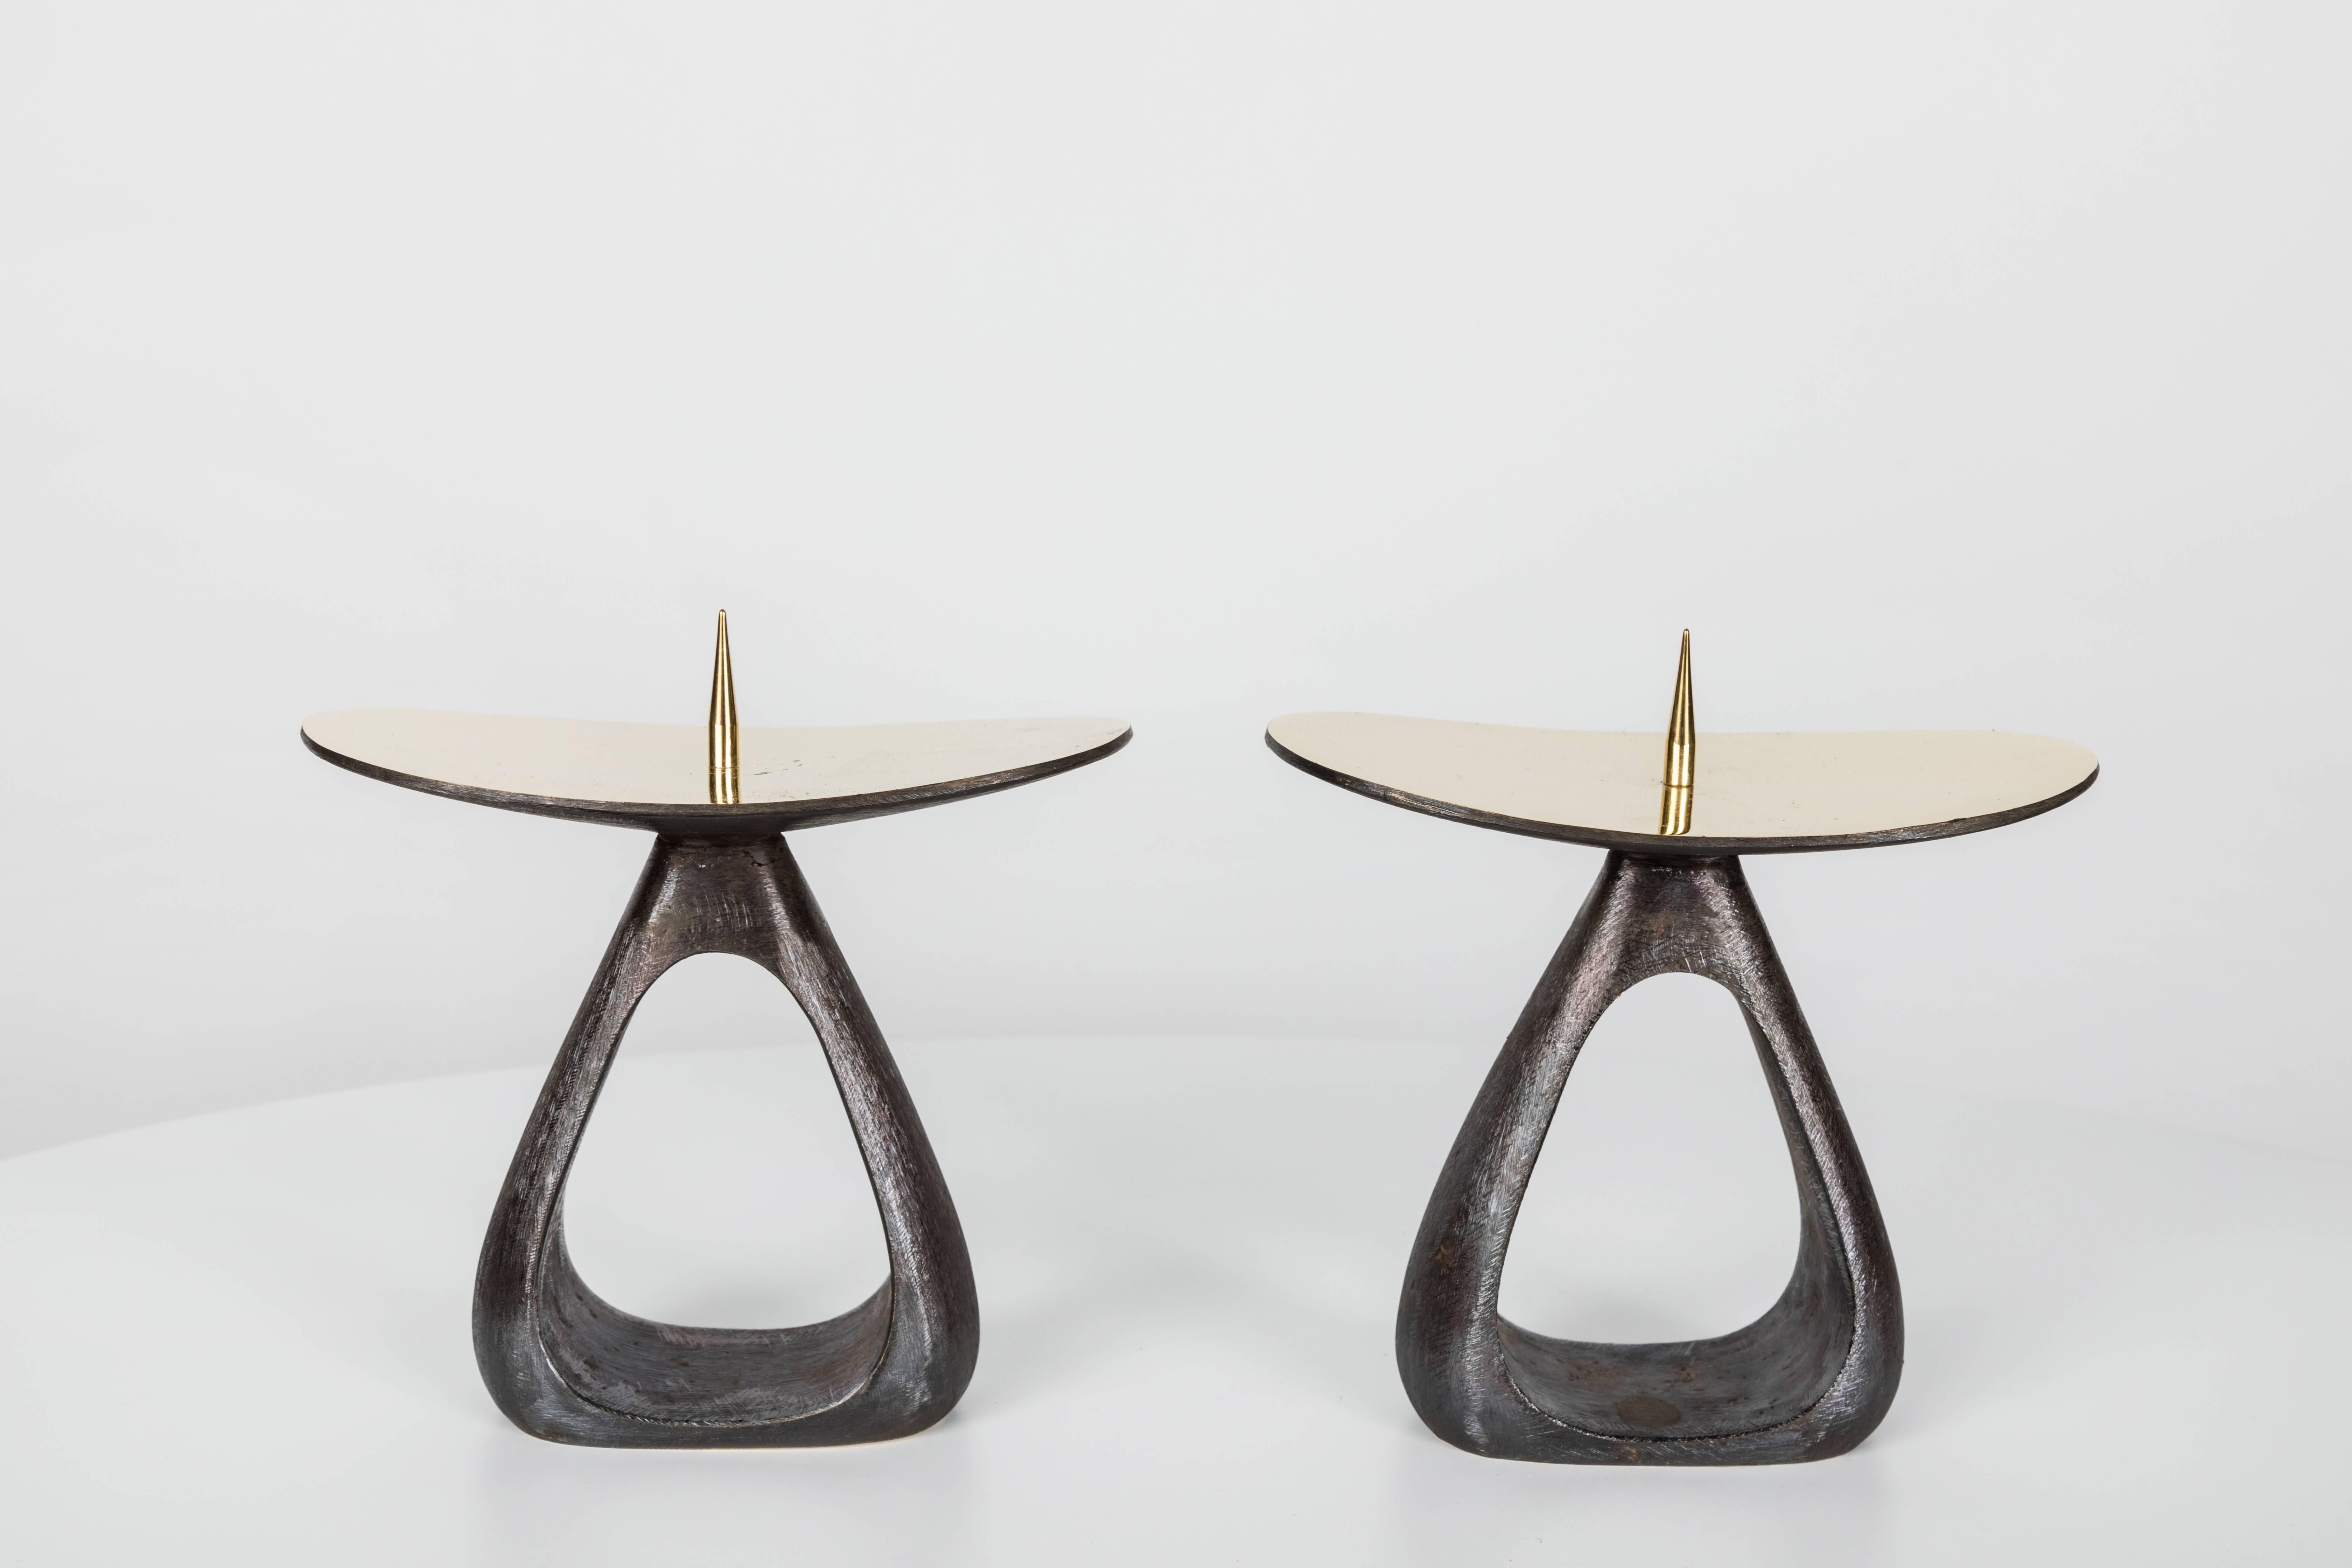 Rare Carl Auböck #3600 brass candleholder. Designed in the 1940s, this incredibly clean and refined Viennese candleholder is executed in polished and darkly patinated brass by Werkstätte Carl Auböck, Austria. 

Price is per item. 

Produced by Carl